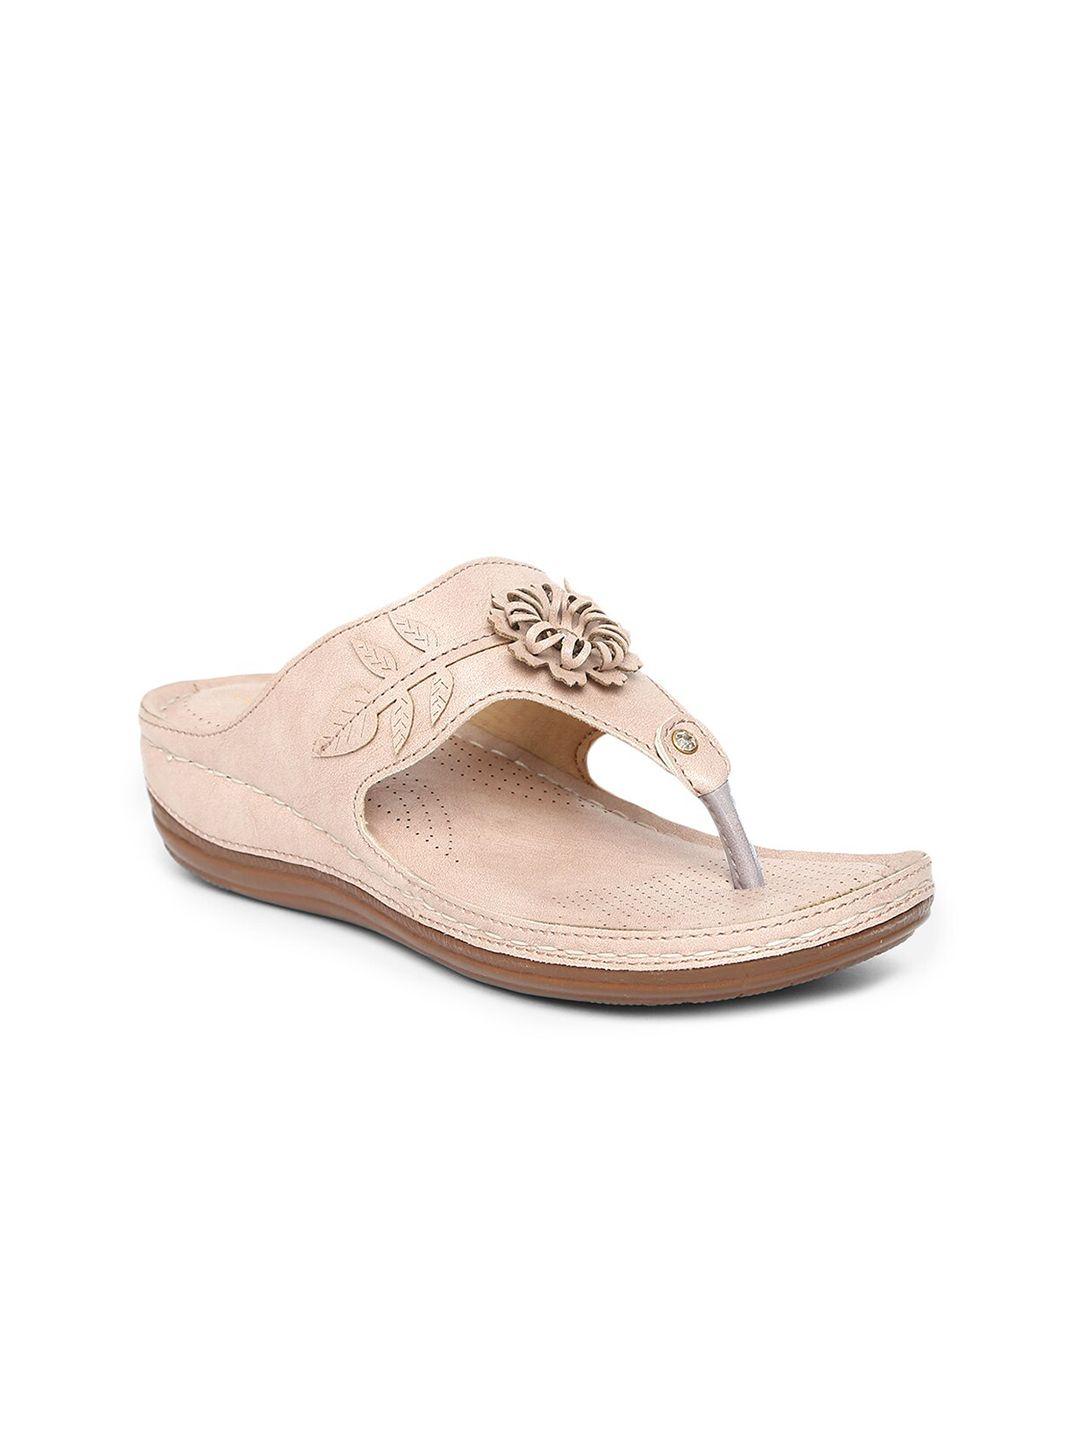 everly-women-pink-embellished-t-strap-flats